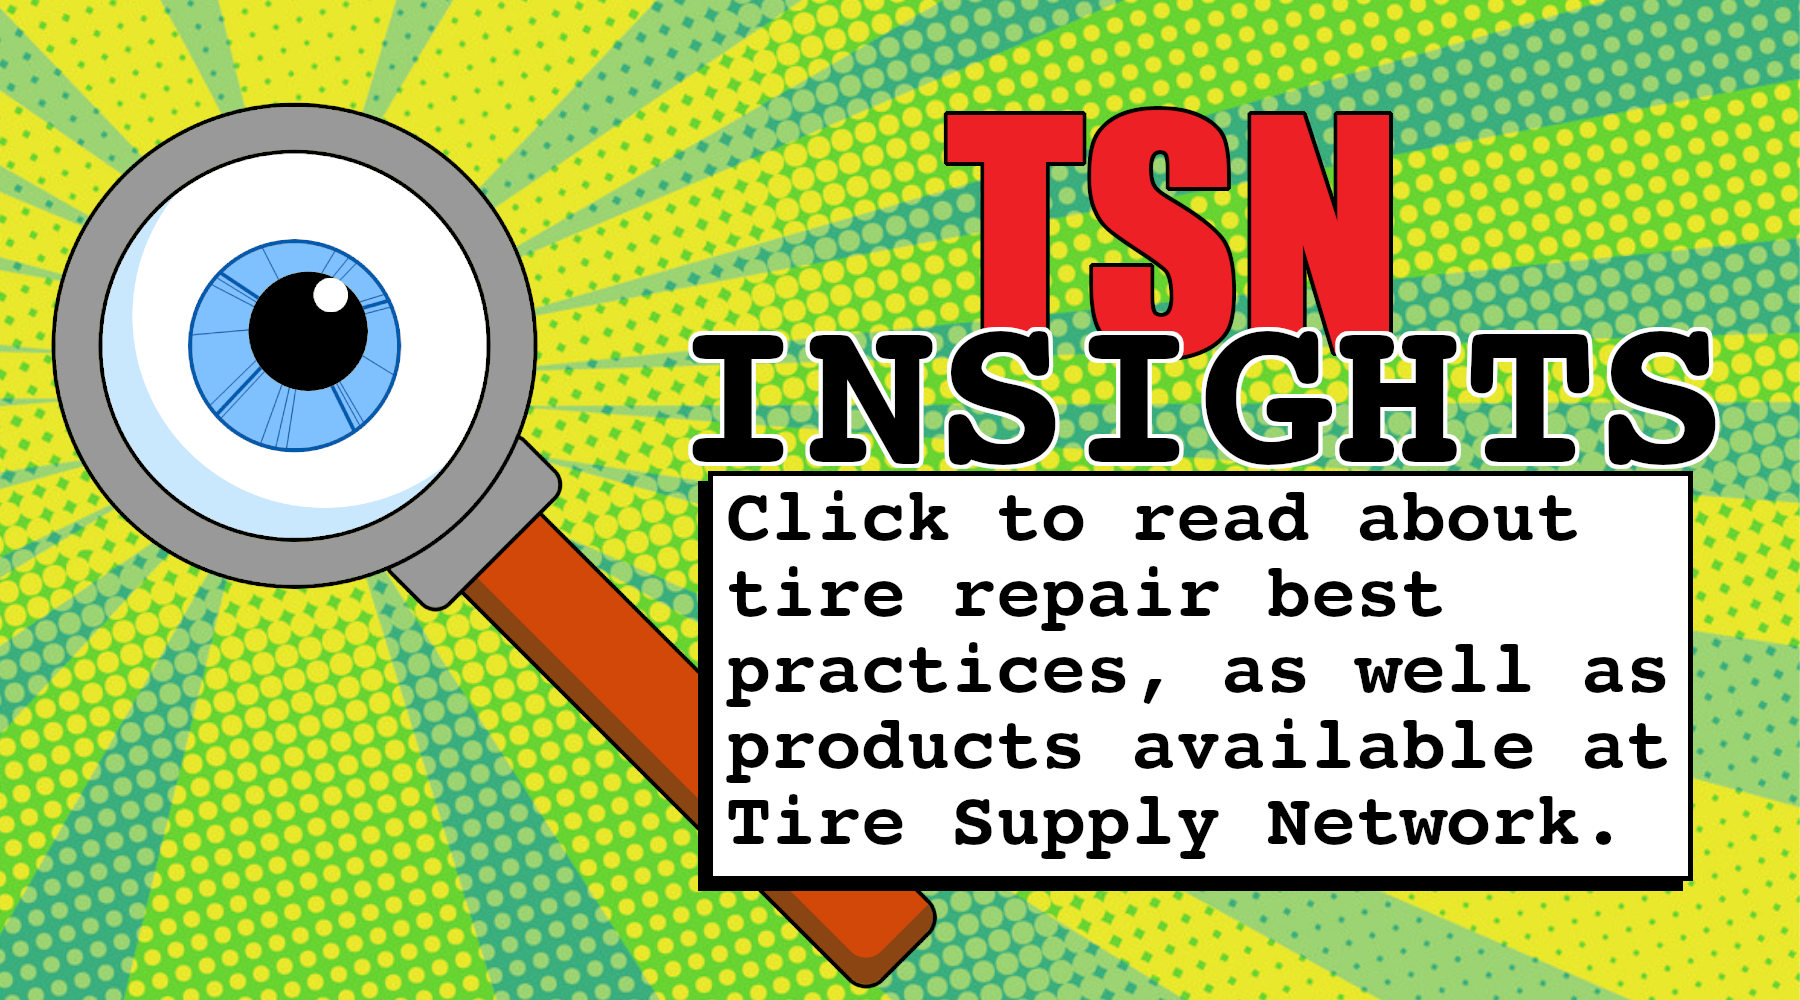 TSN-insights-blog-posts-tire-repair-best-practices-procedures-information-new-products-programs-features-tire-supplies-tire-repair-tire-supplier-valve-stems-wheel-weights-tire-patches